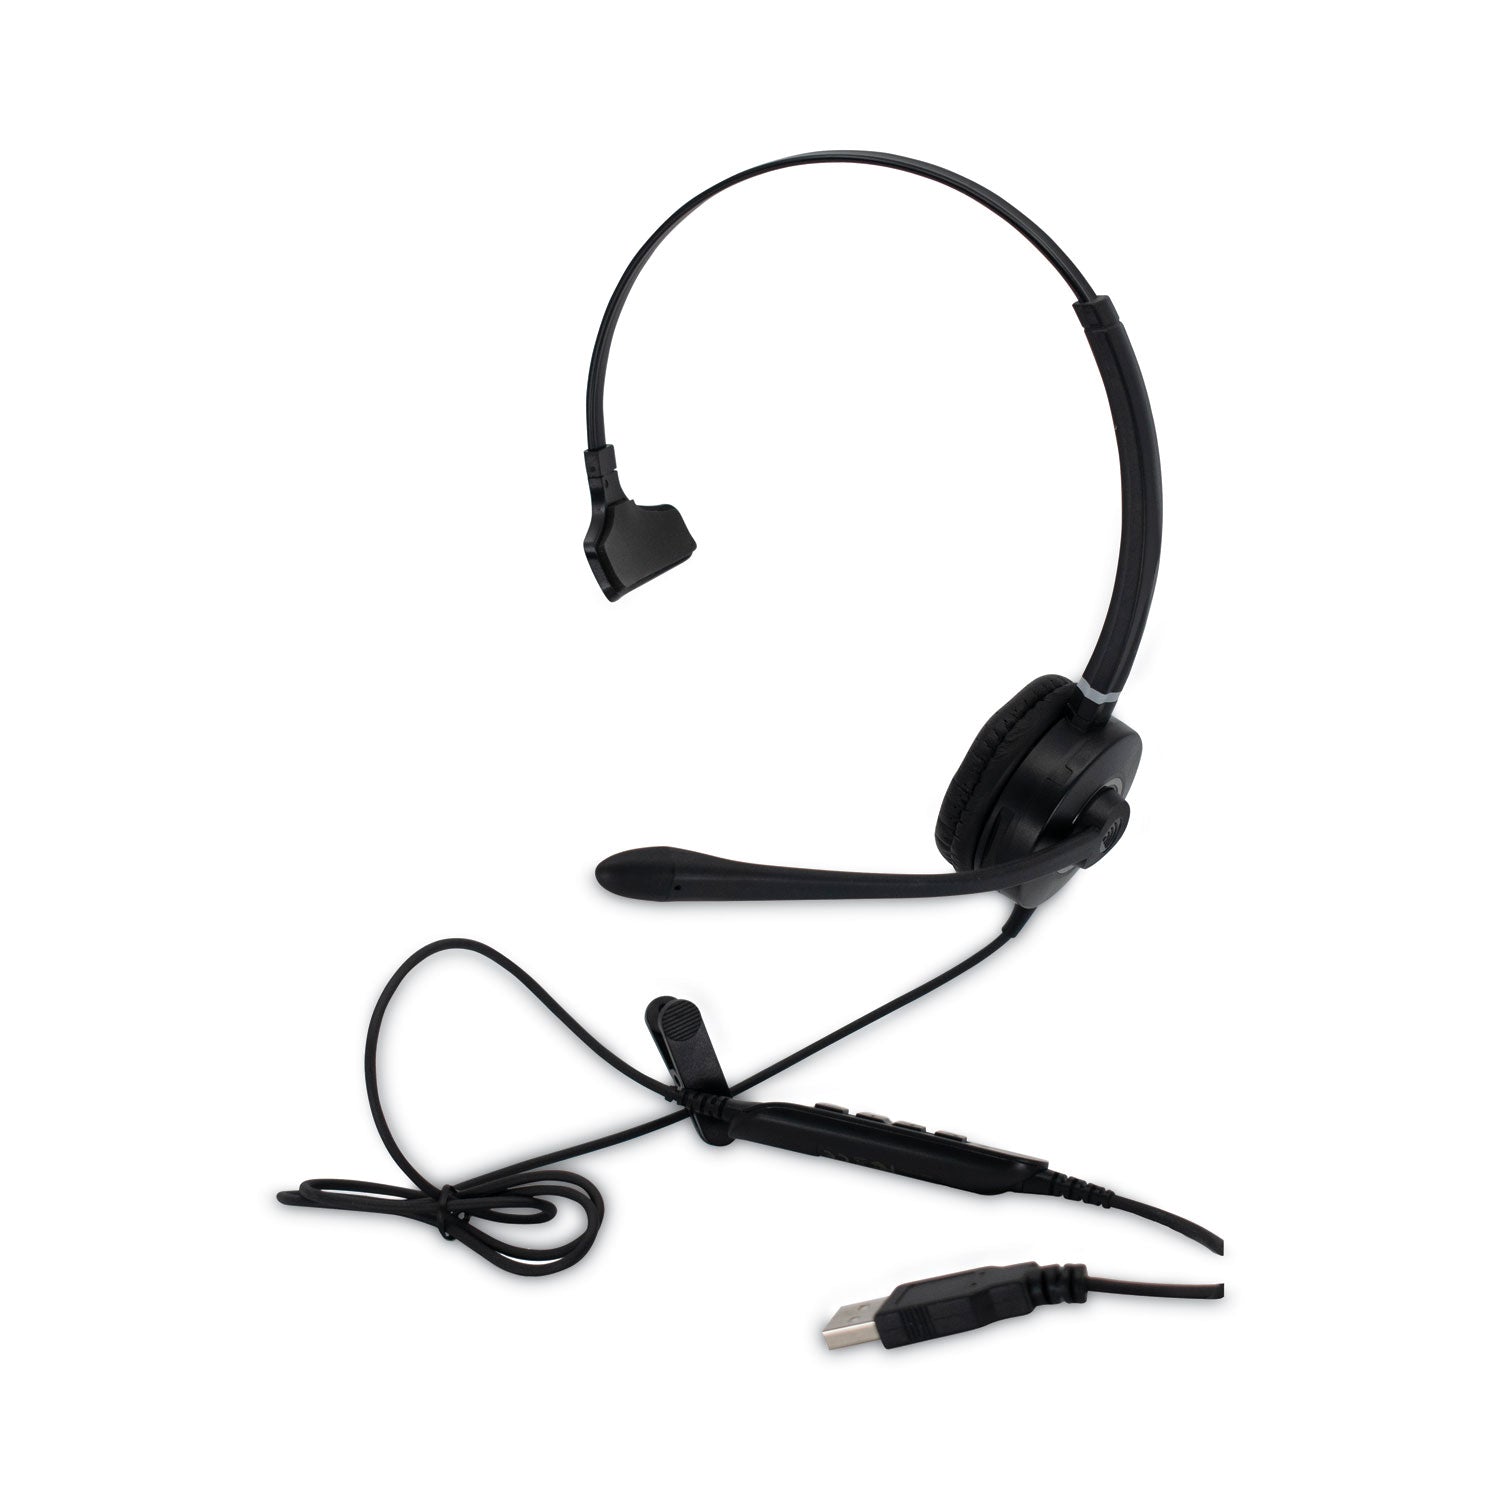 hs-wd-usb-1-monaural-over-the-head-headset-black_spthswdusb1 - 4